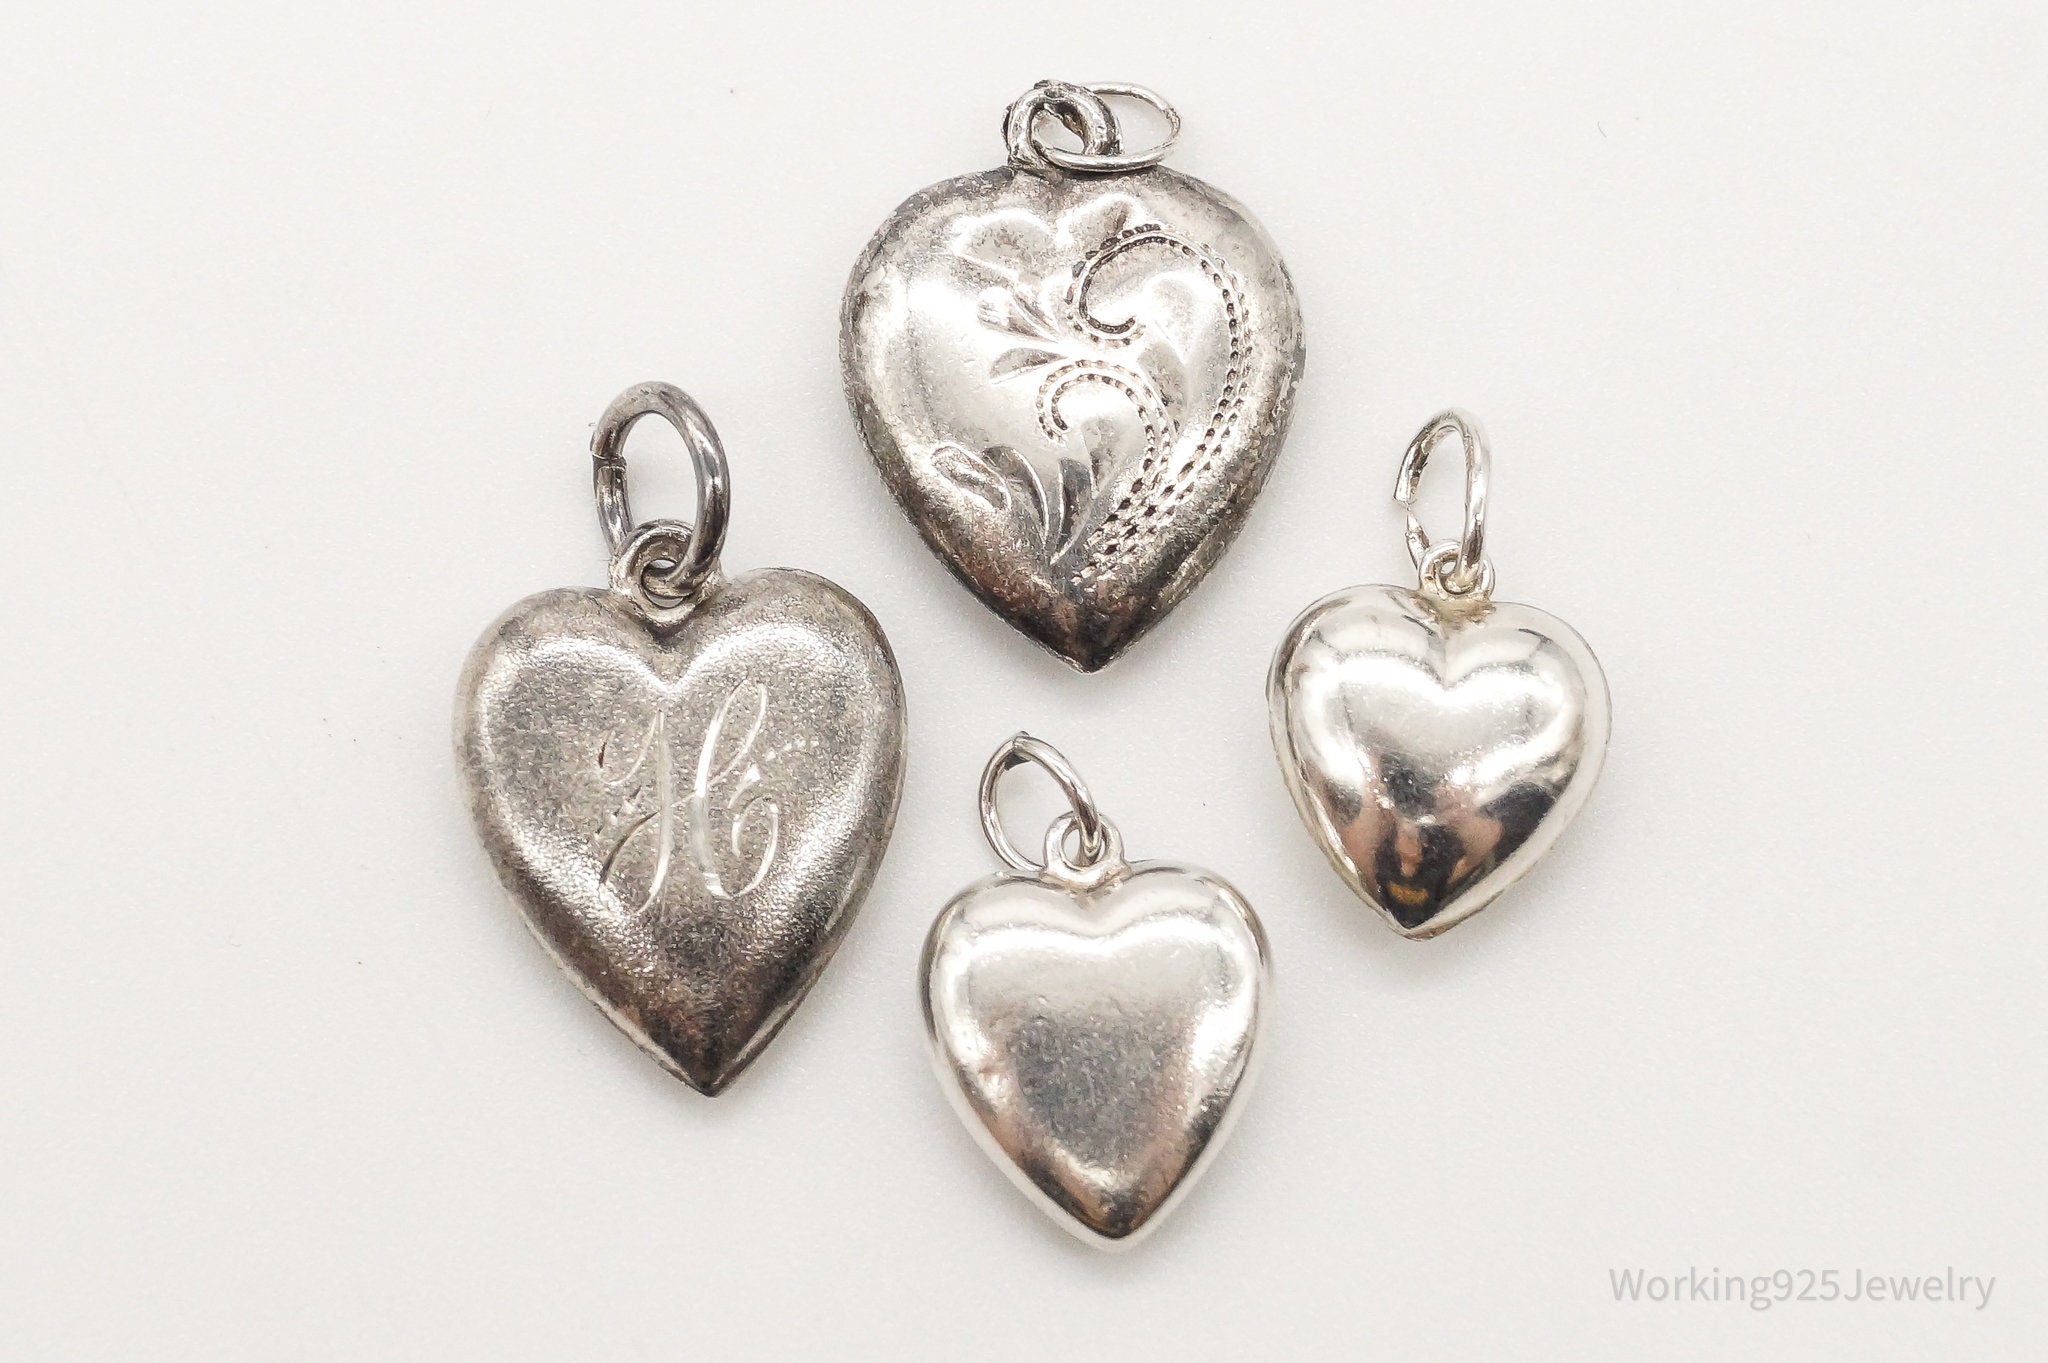 Antique Love Puffy Hearts Sterling Silver Charms Set Lot